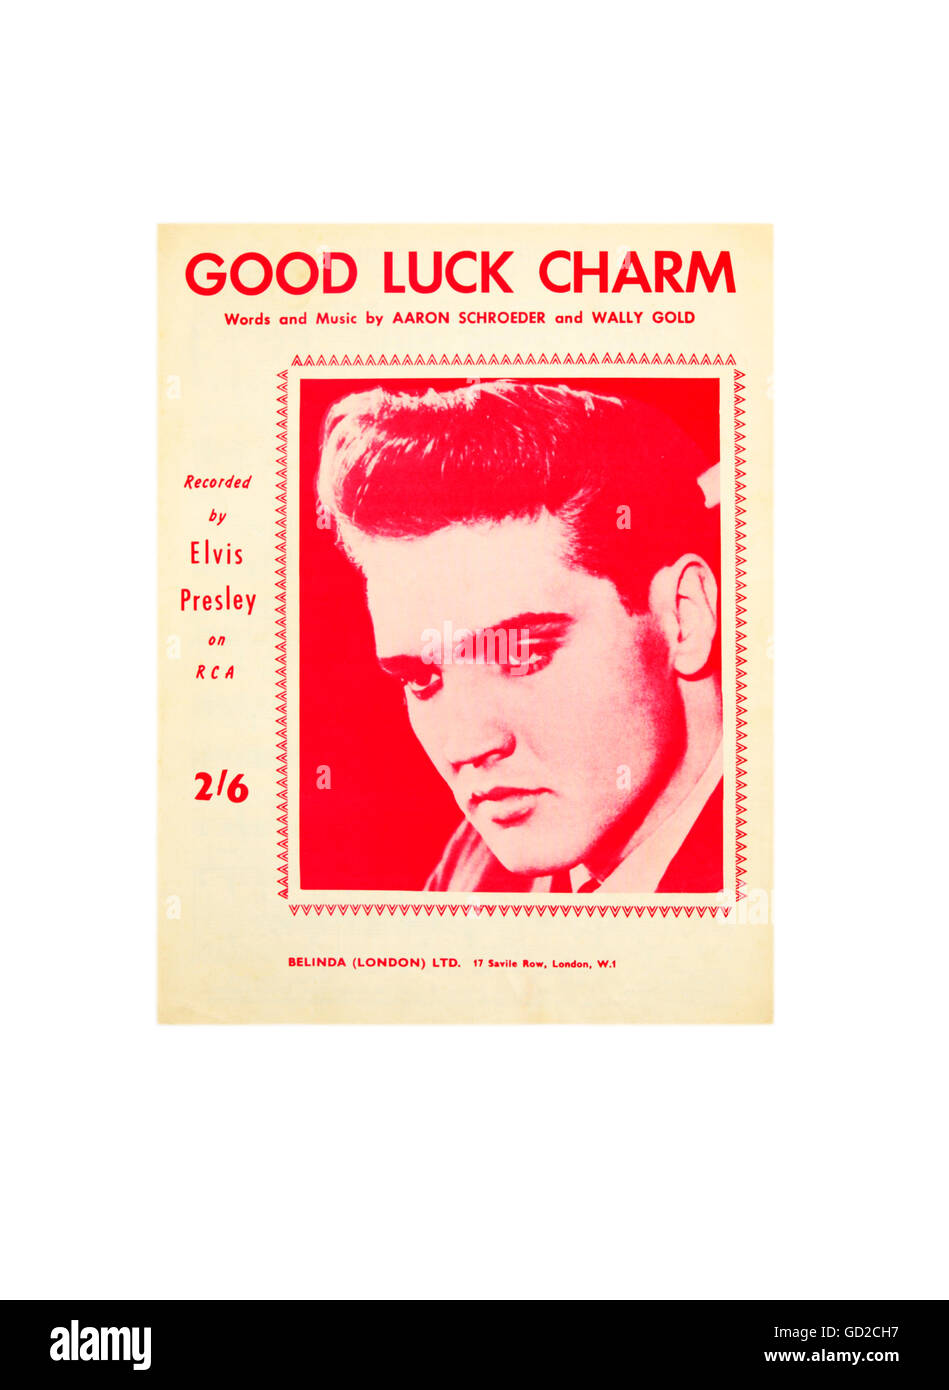 Good Luck Charm sheet music cover by Elvis Presley. Stock Photo